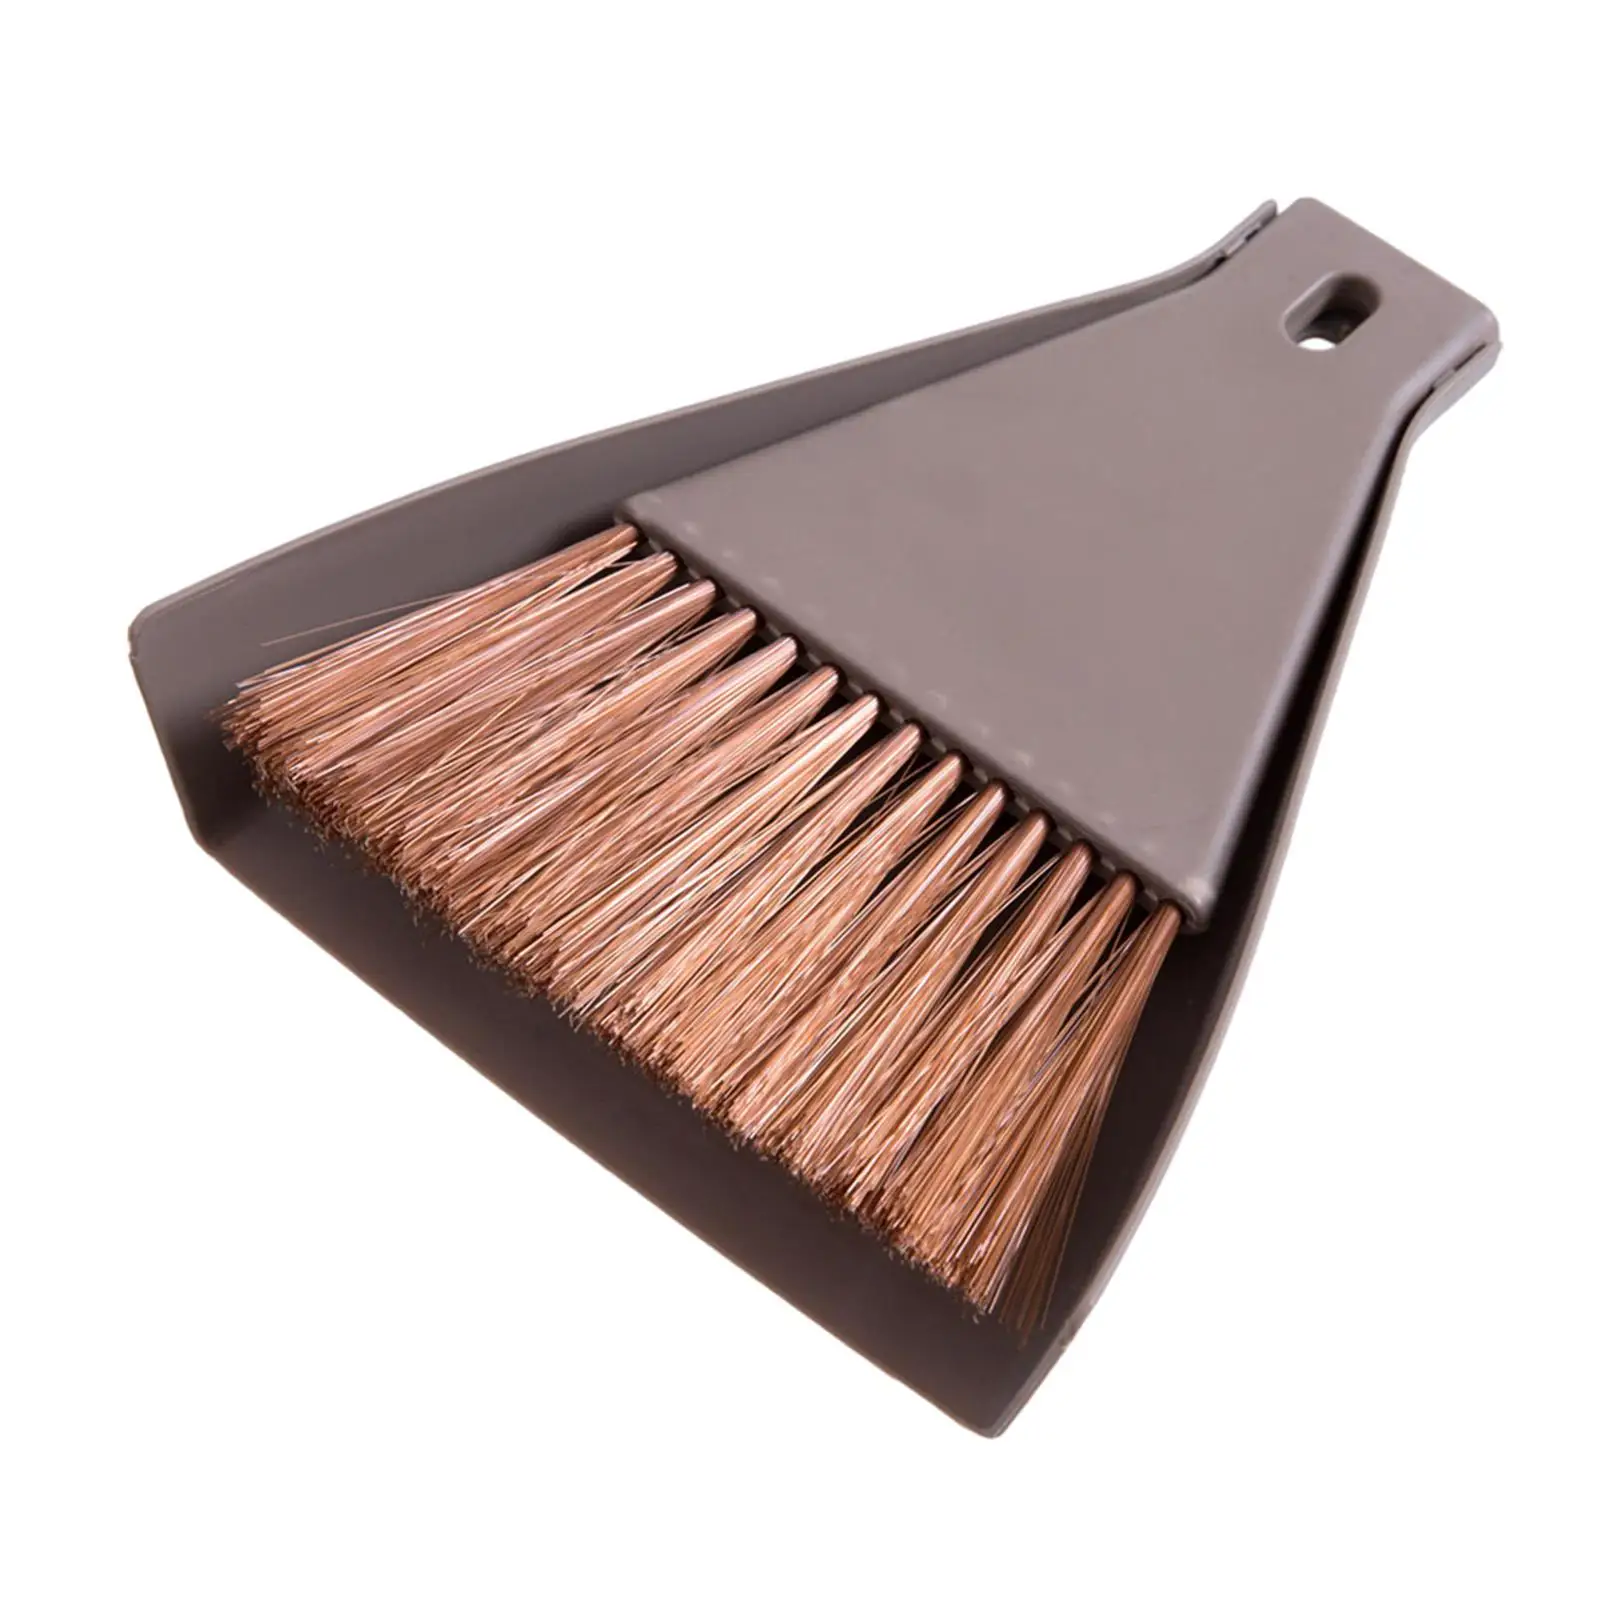 Small Broom and Dustpan Set Portable Hand Brush Sweeping Broom Dust Pan Table Cleaning Brush for Desktop Table Car Keyboard Home